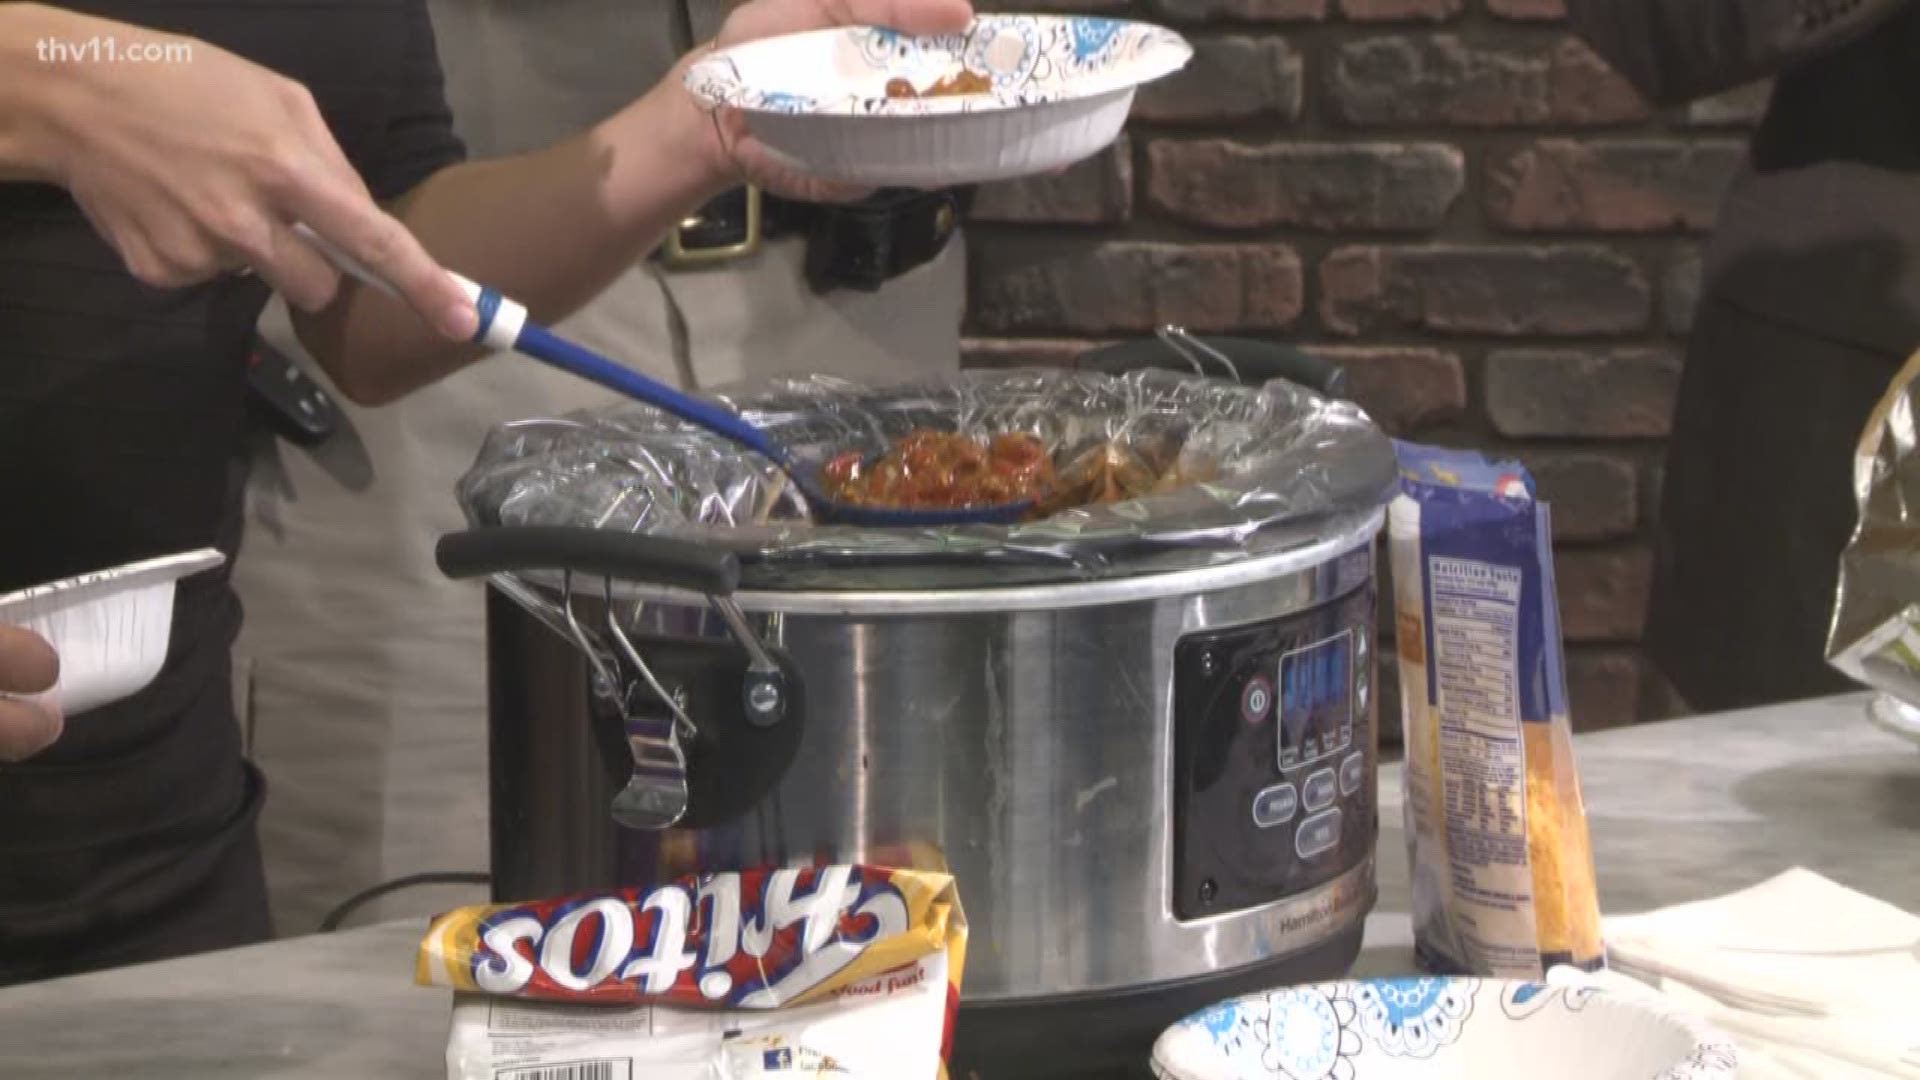 As our Chili Challenge comes to an end, Rob Evans showed us his cooking skills